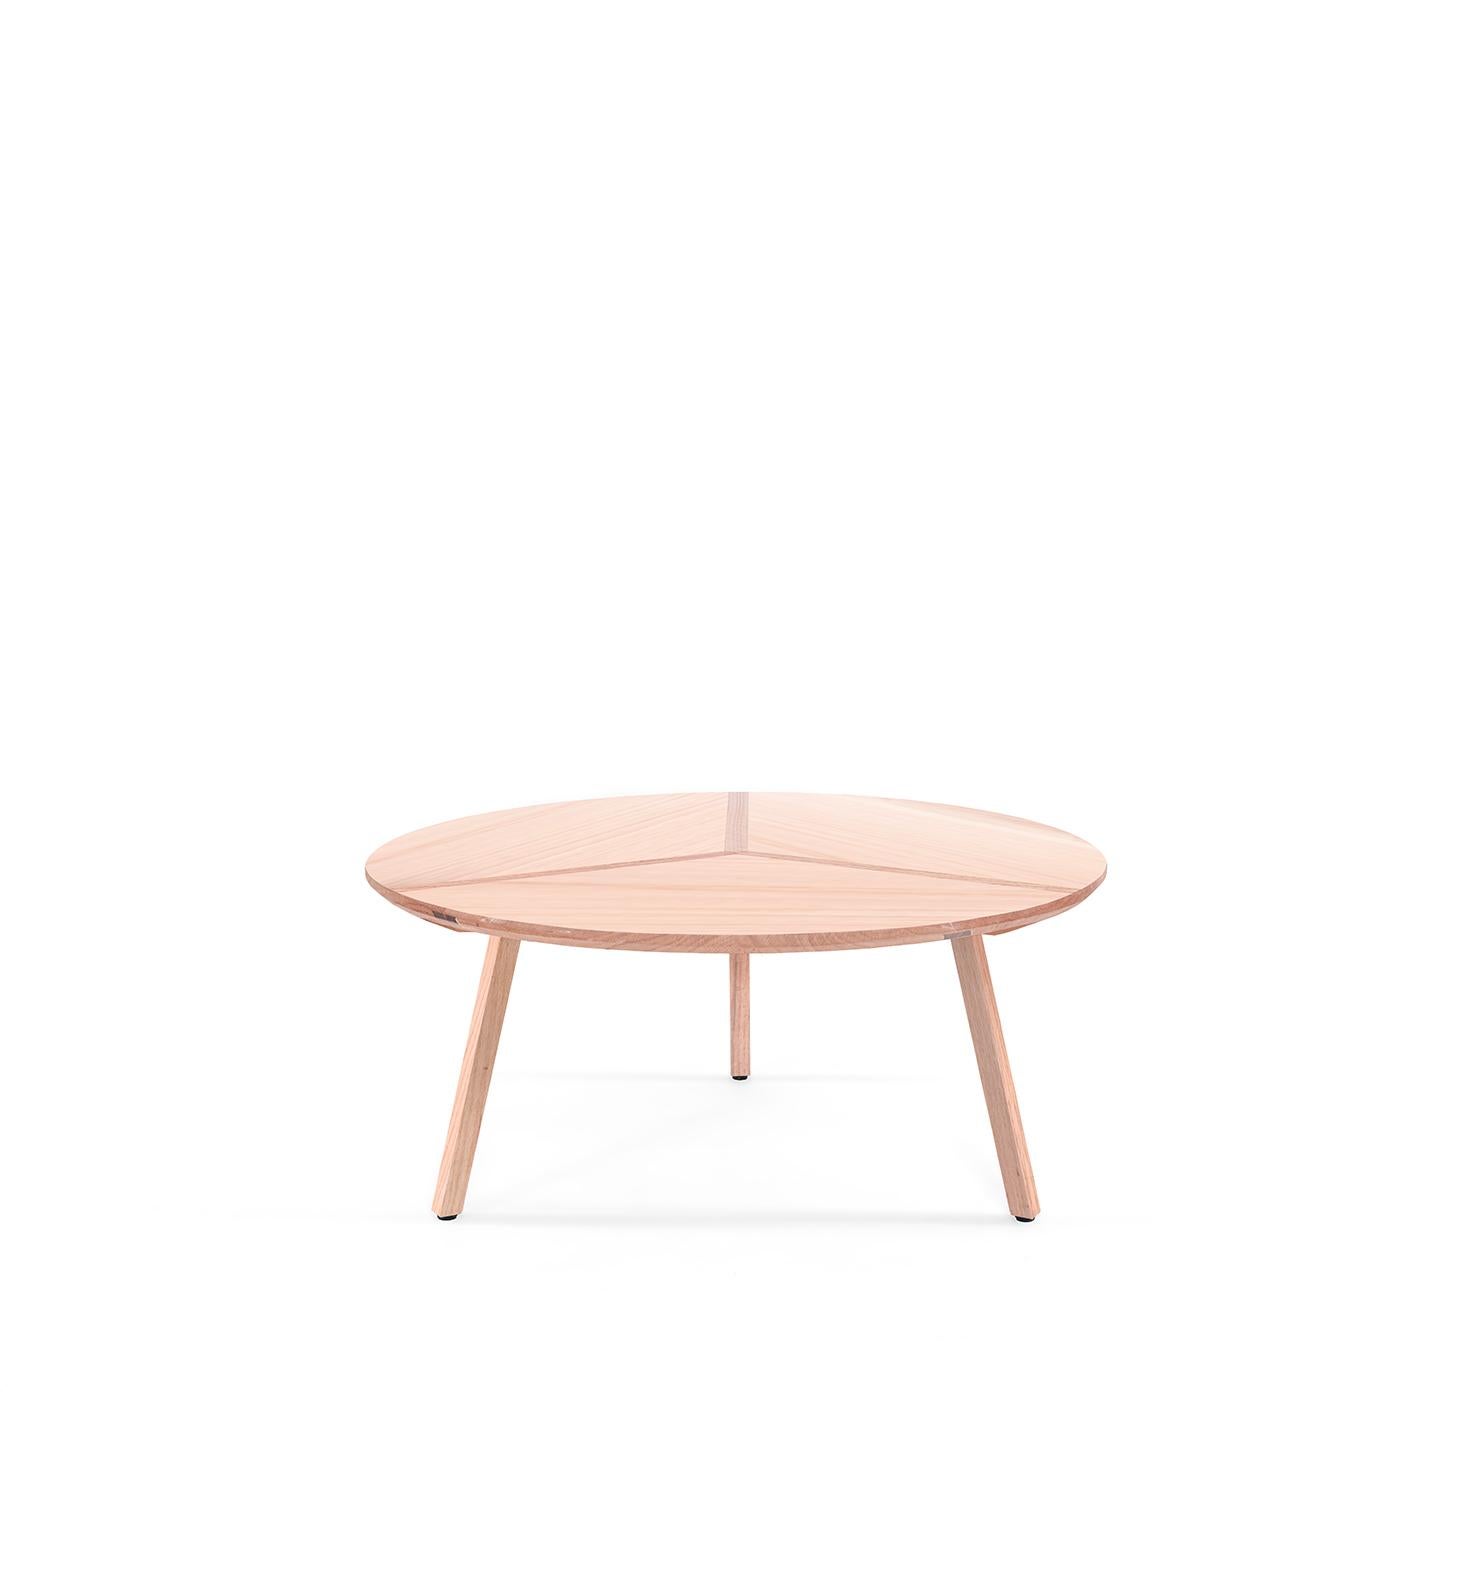 Circuito 80 is a stunning Mexican contemporary table designed by Emiliano Molina for CUCHARA. The table is a true masterpiece of woodcraft, featuring stunning assemblies that make it stand out from the crowd. It is a timeless piece characterized by